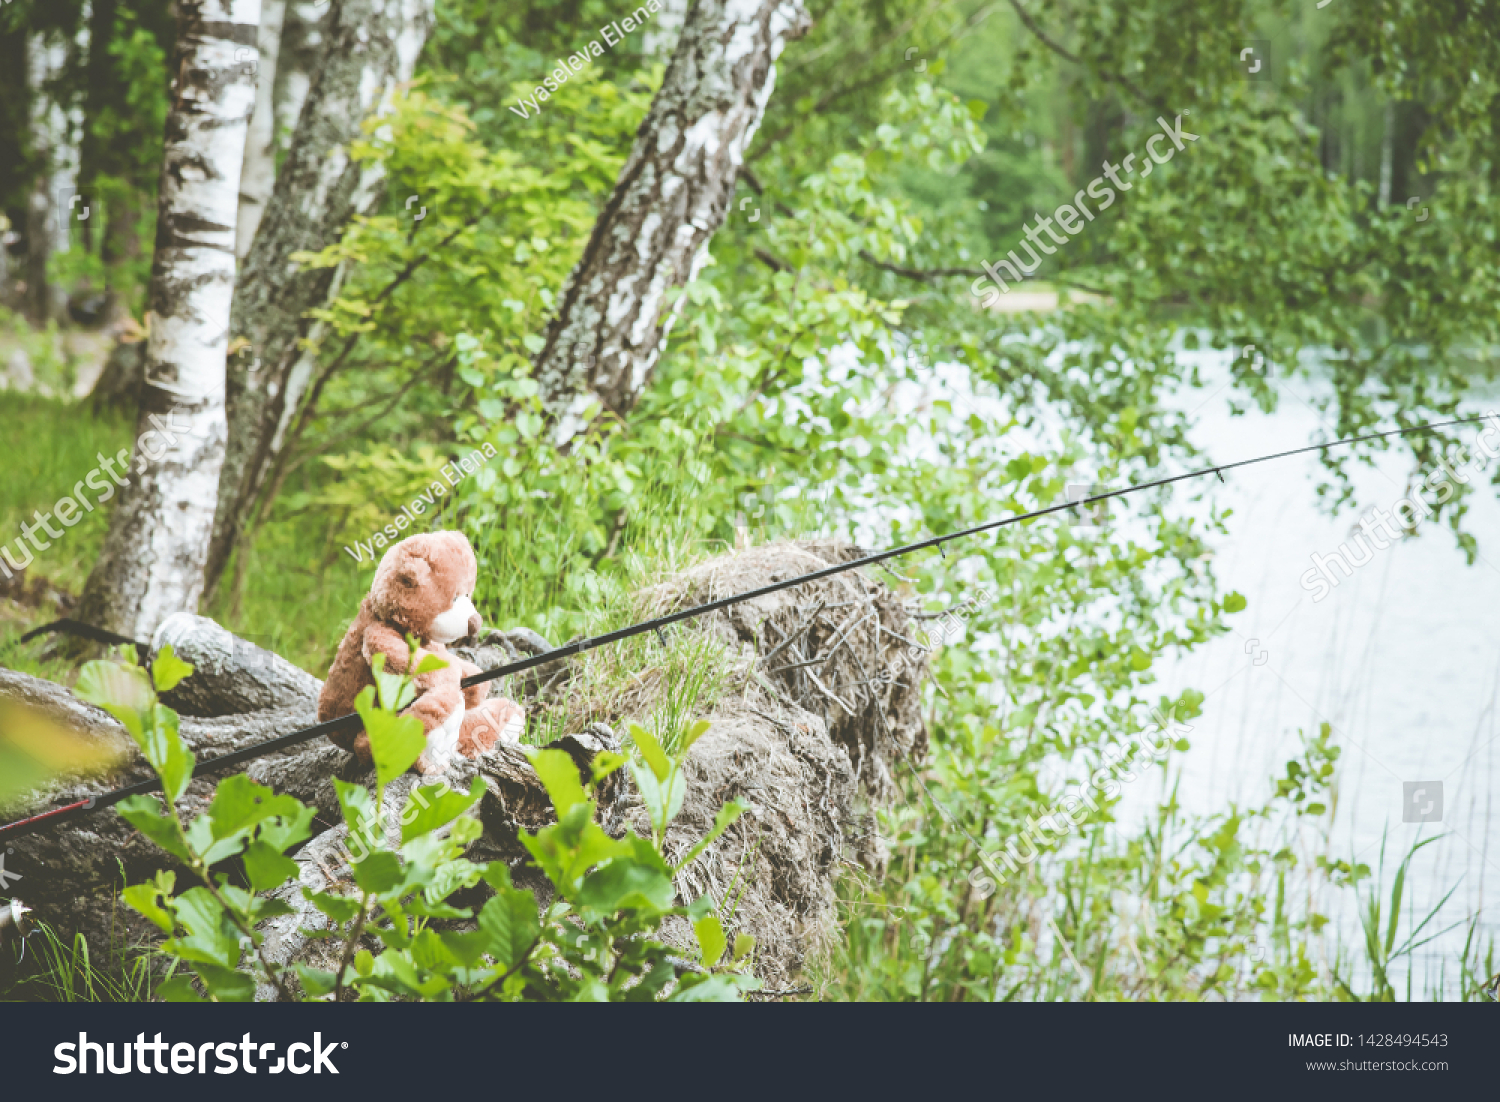 Teddy bear fisherman. Brown teddy bear sits by the lake with a fishing rod and catches fish. Summer nature idyllic landscape #1428494543